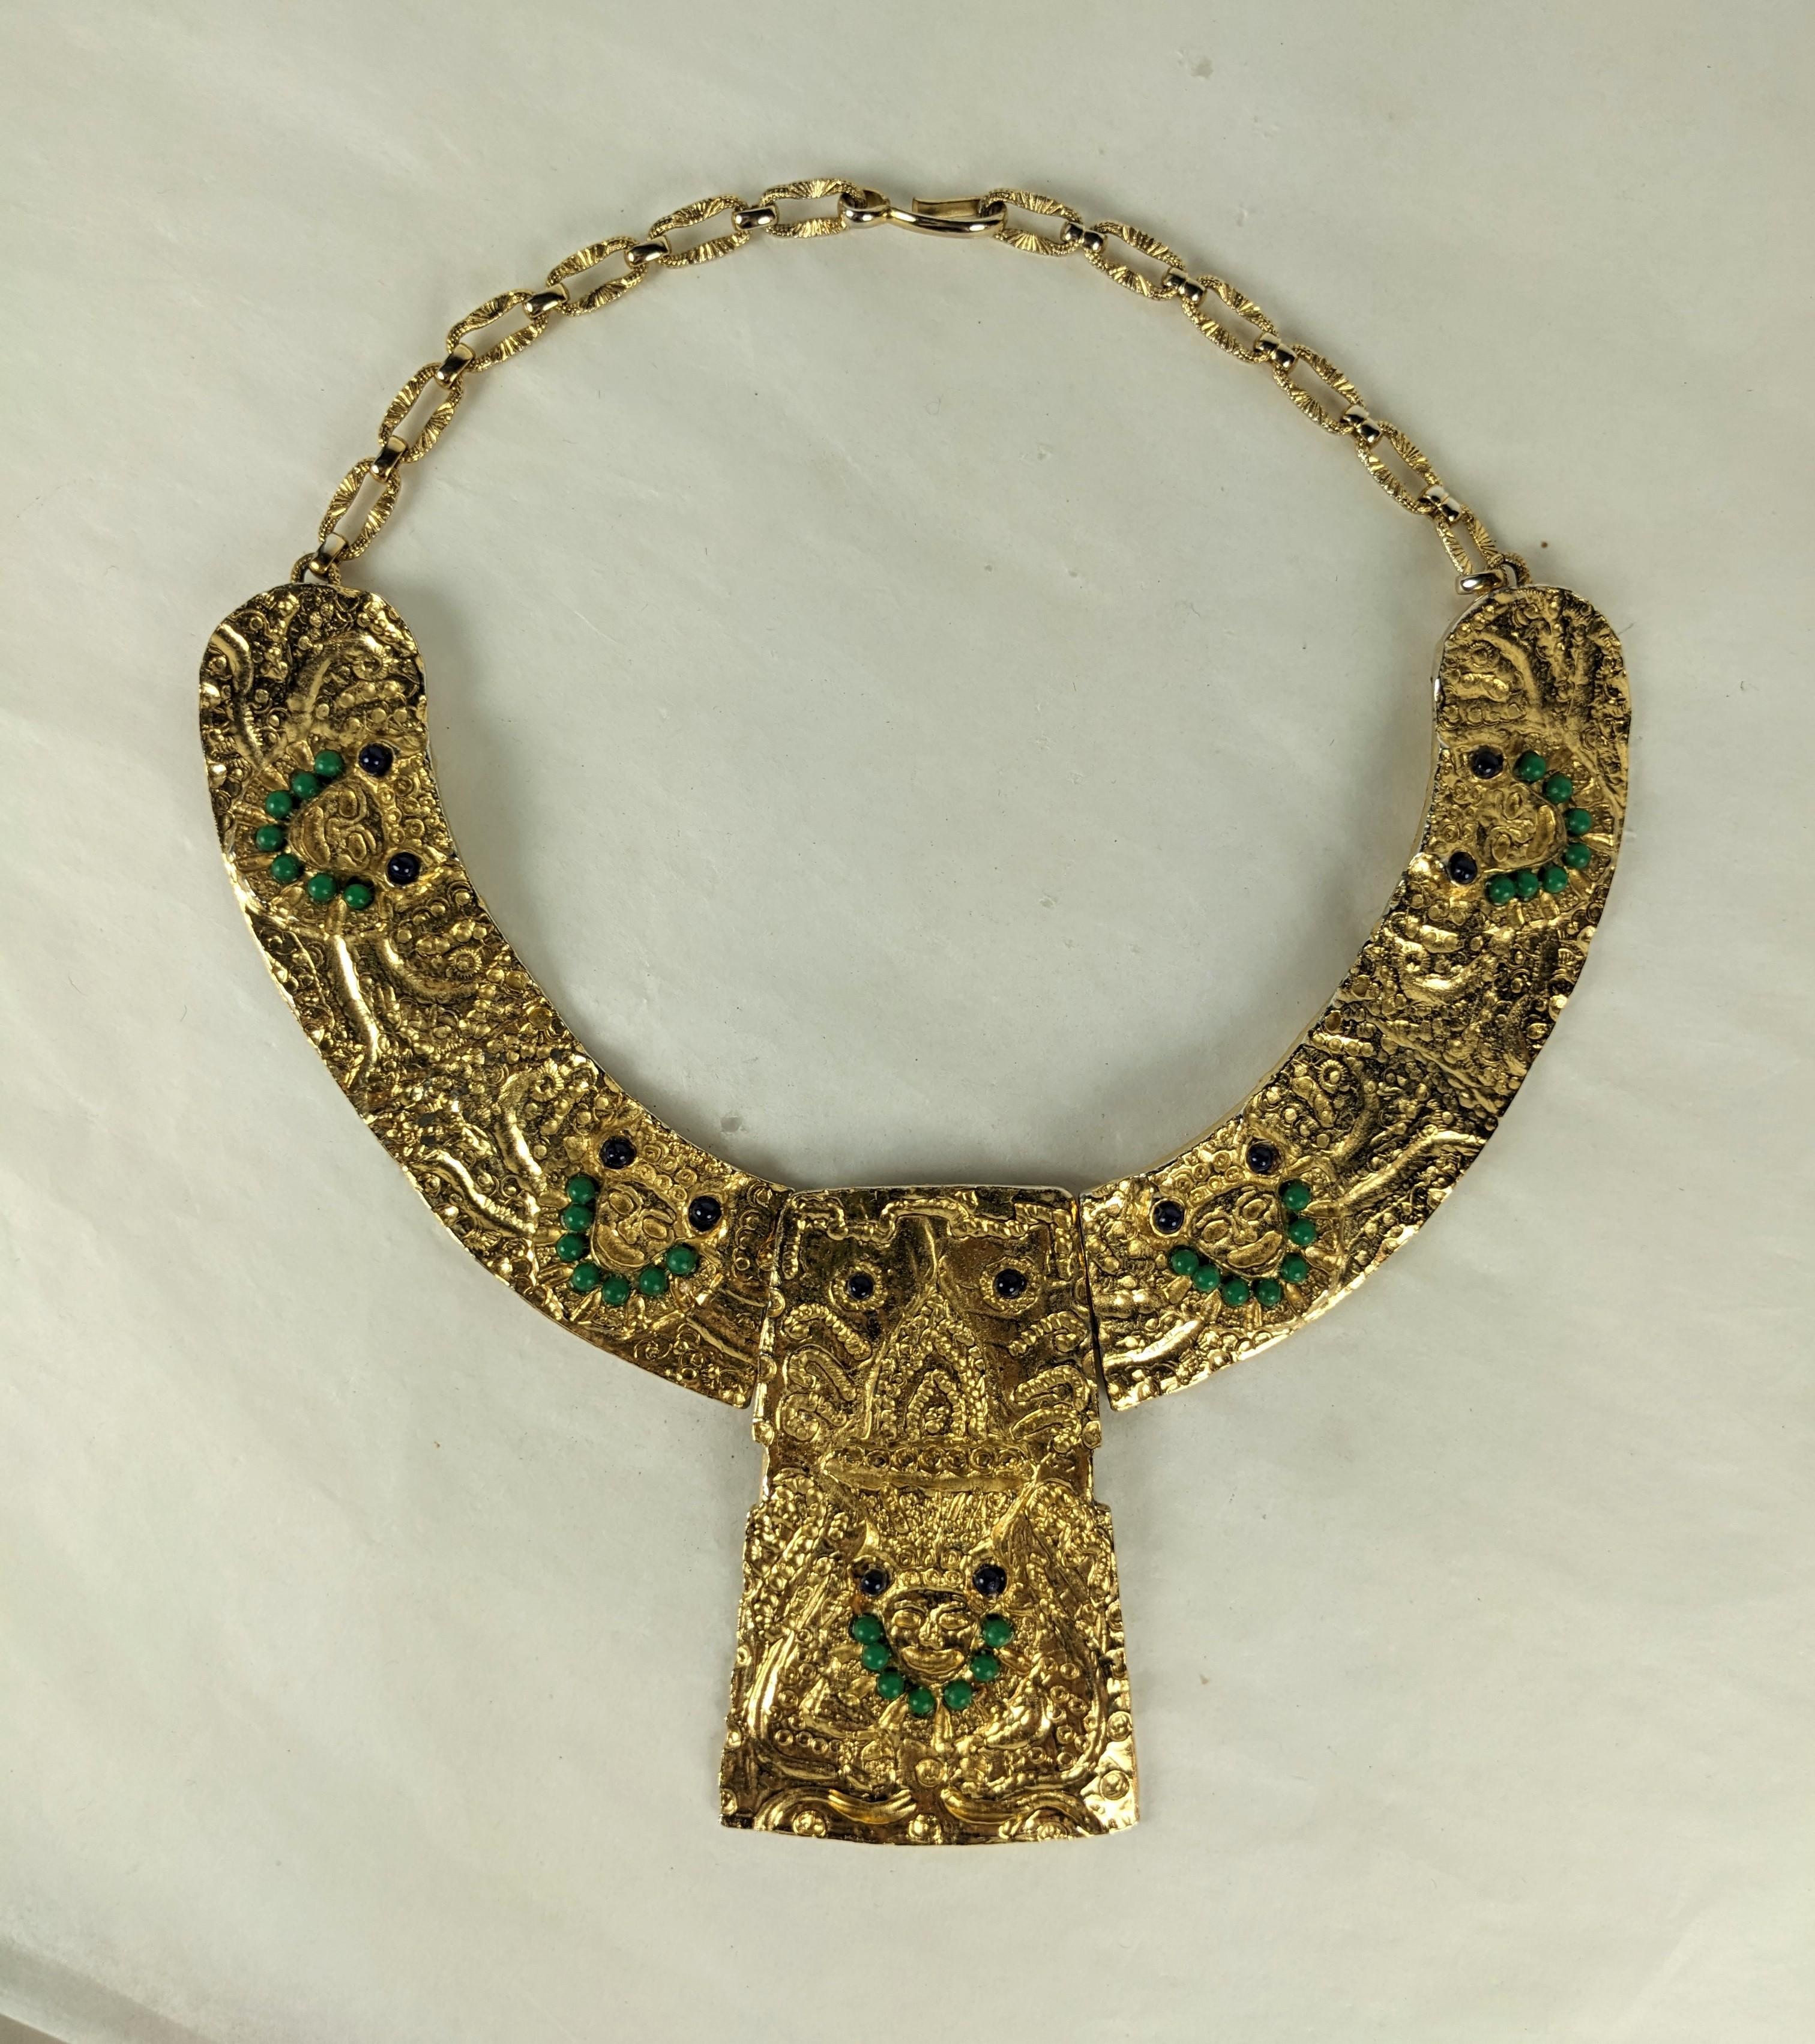 1960's Gilt Collar with Pre Columbian mask motifs. Hard collar is hinged at front to central plaque. Gilt metal with black and deep green beads. Centerpiece 3